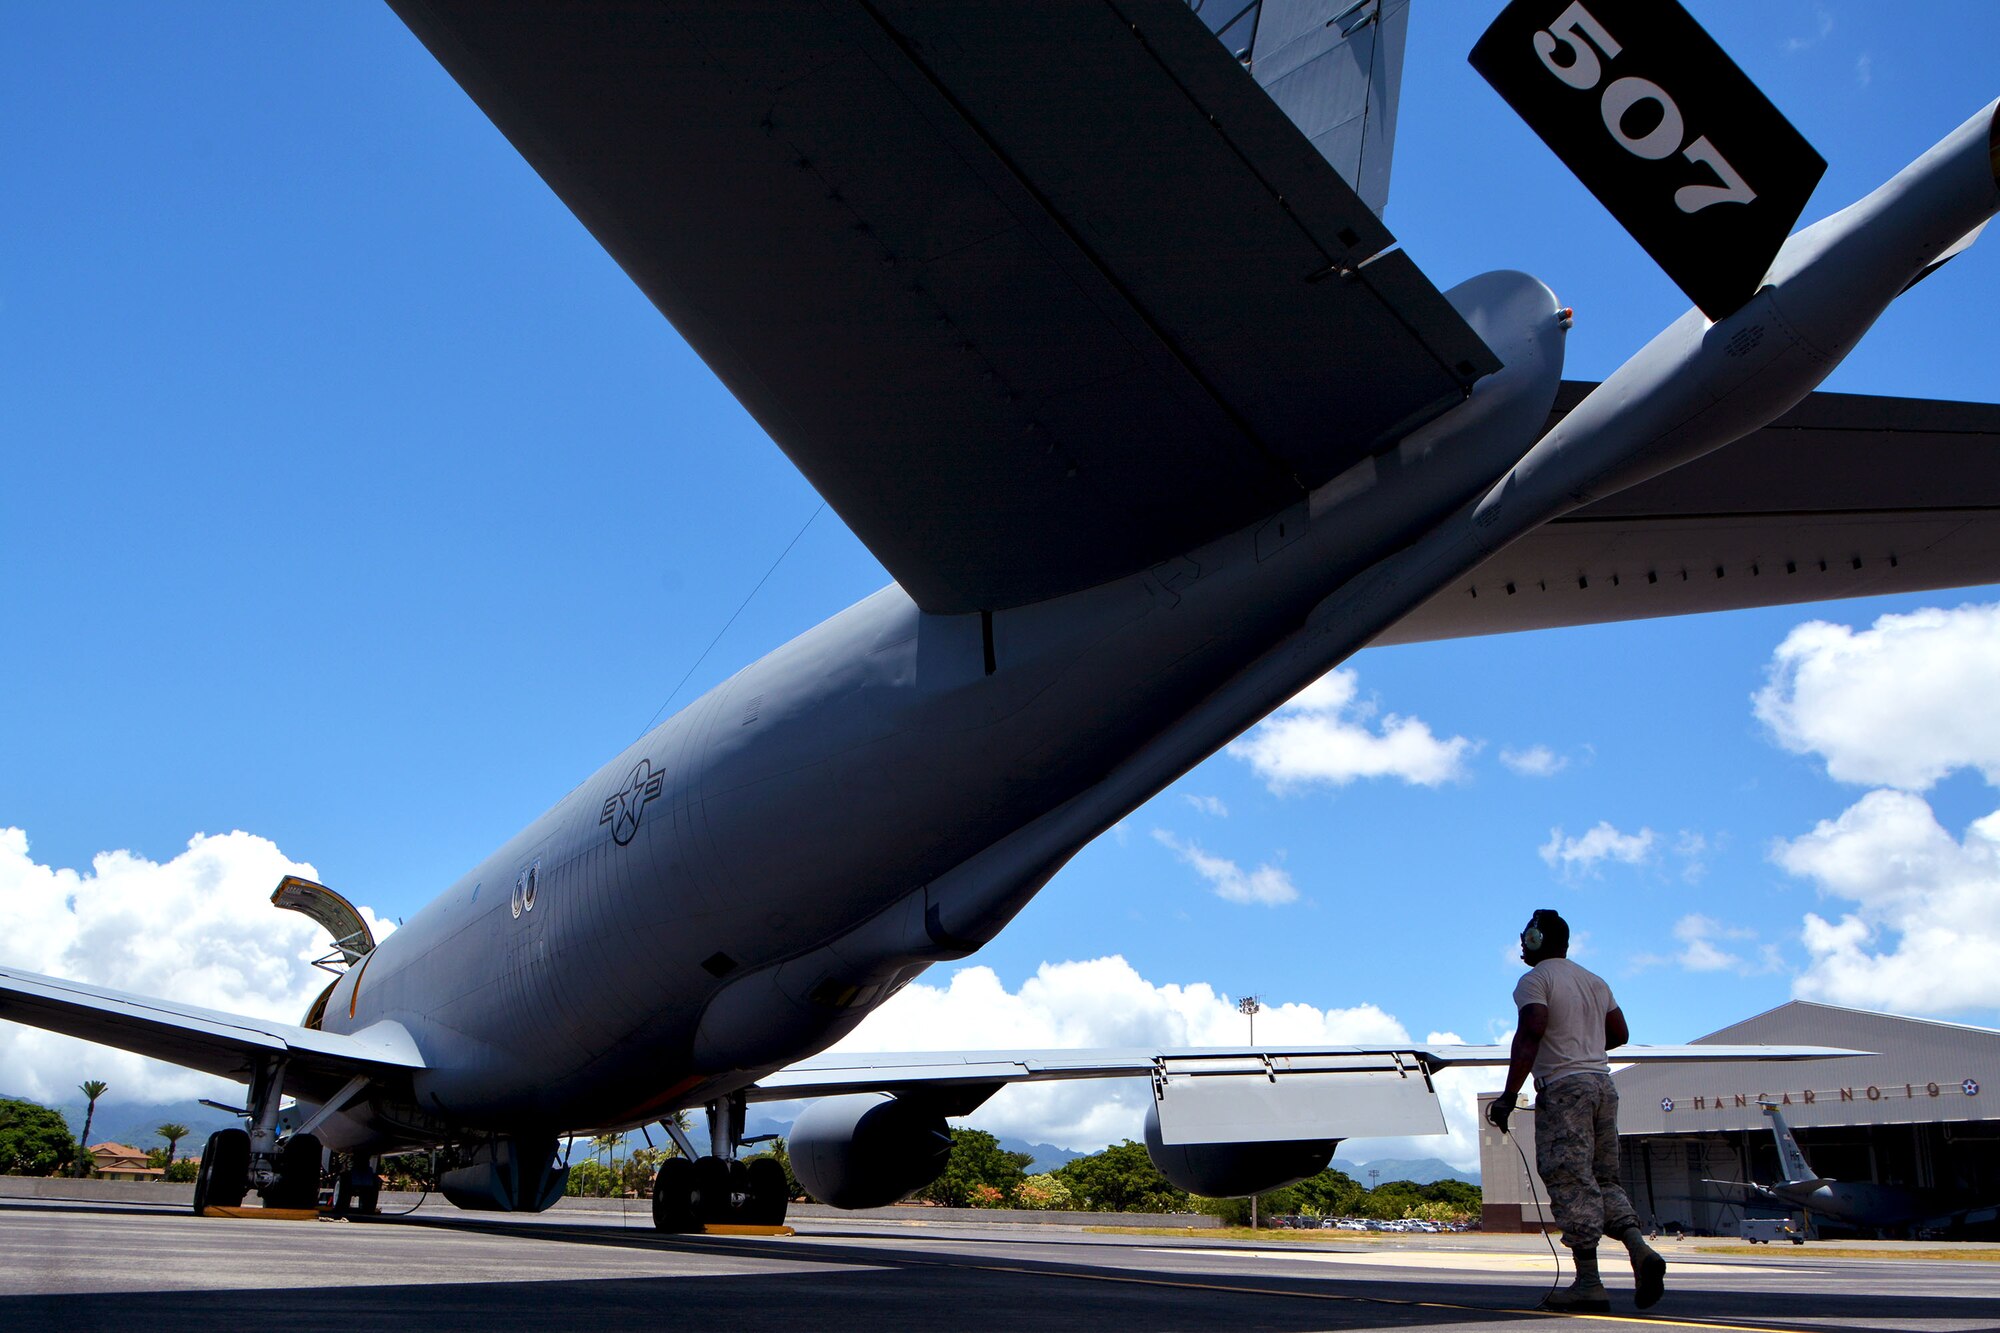 Staff Sgt. Reginald Felton, 507th Maintenance Squadron crew chief, prepares a KC-135R Stratotanker for flight, July 9. Twenty-five nations, 46 ships, five submarines, and about 200 aircraft and 25,000 personnel are participating in RIMPAC from June 27 to Aug. 2 in and around the Hawaiian Islands and Southern California. The world’s largest international maritime exercise, RIMPAC provides a unique training opportunity while fostering and sustaining cooperative relationships among participants critical to ensuring the safety of sea lanes and security of the world’s oceans. RIMPAC 2018 is the 26th exercise in the series that began in 1971. (U.S. Air Force photo by Tech. Sgt. Samantha Mathison)